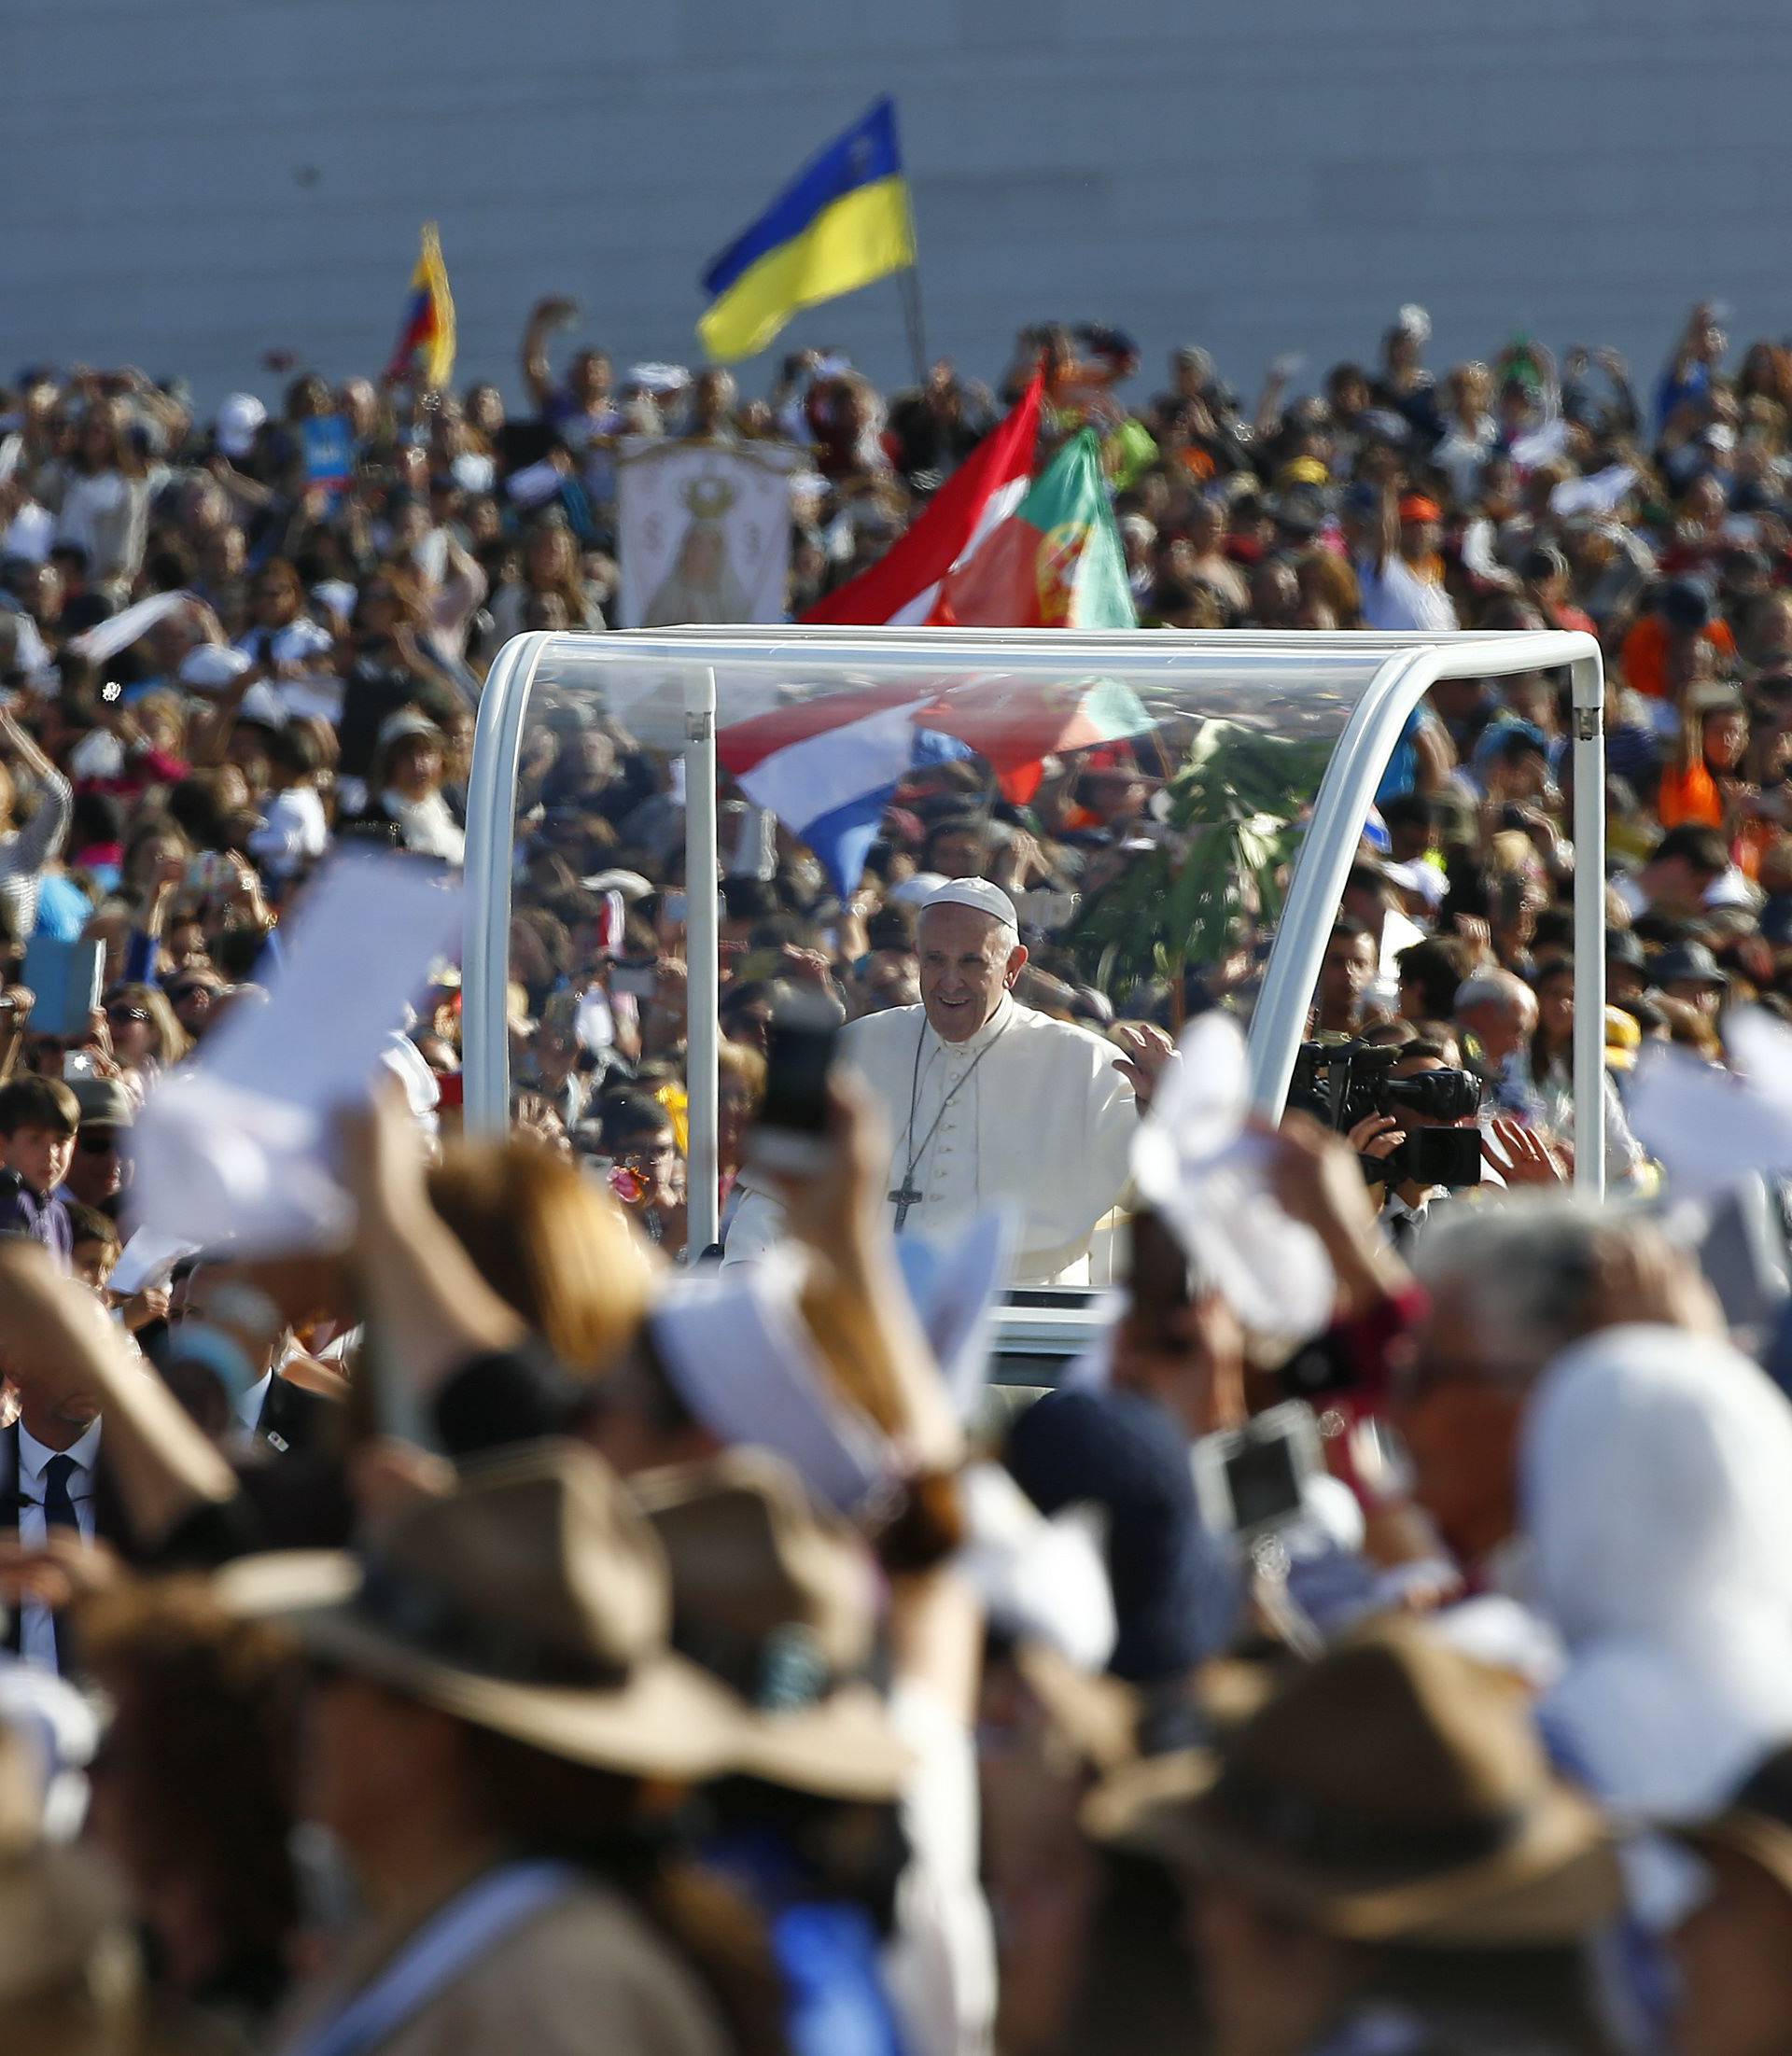 Pope Francis waves as he arrives at the Shrine of Our Lady of Fatima in Portugal